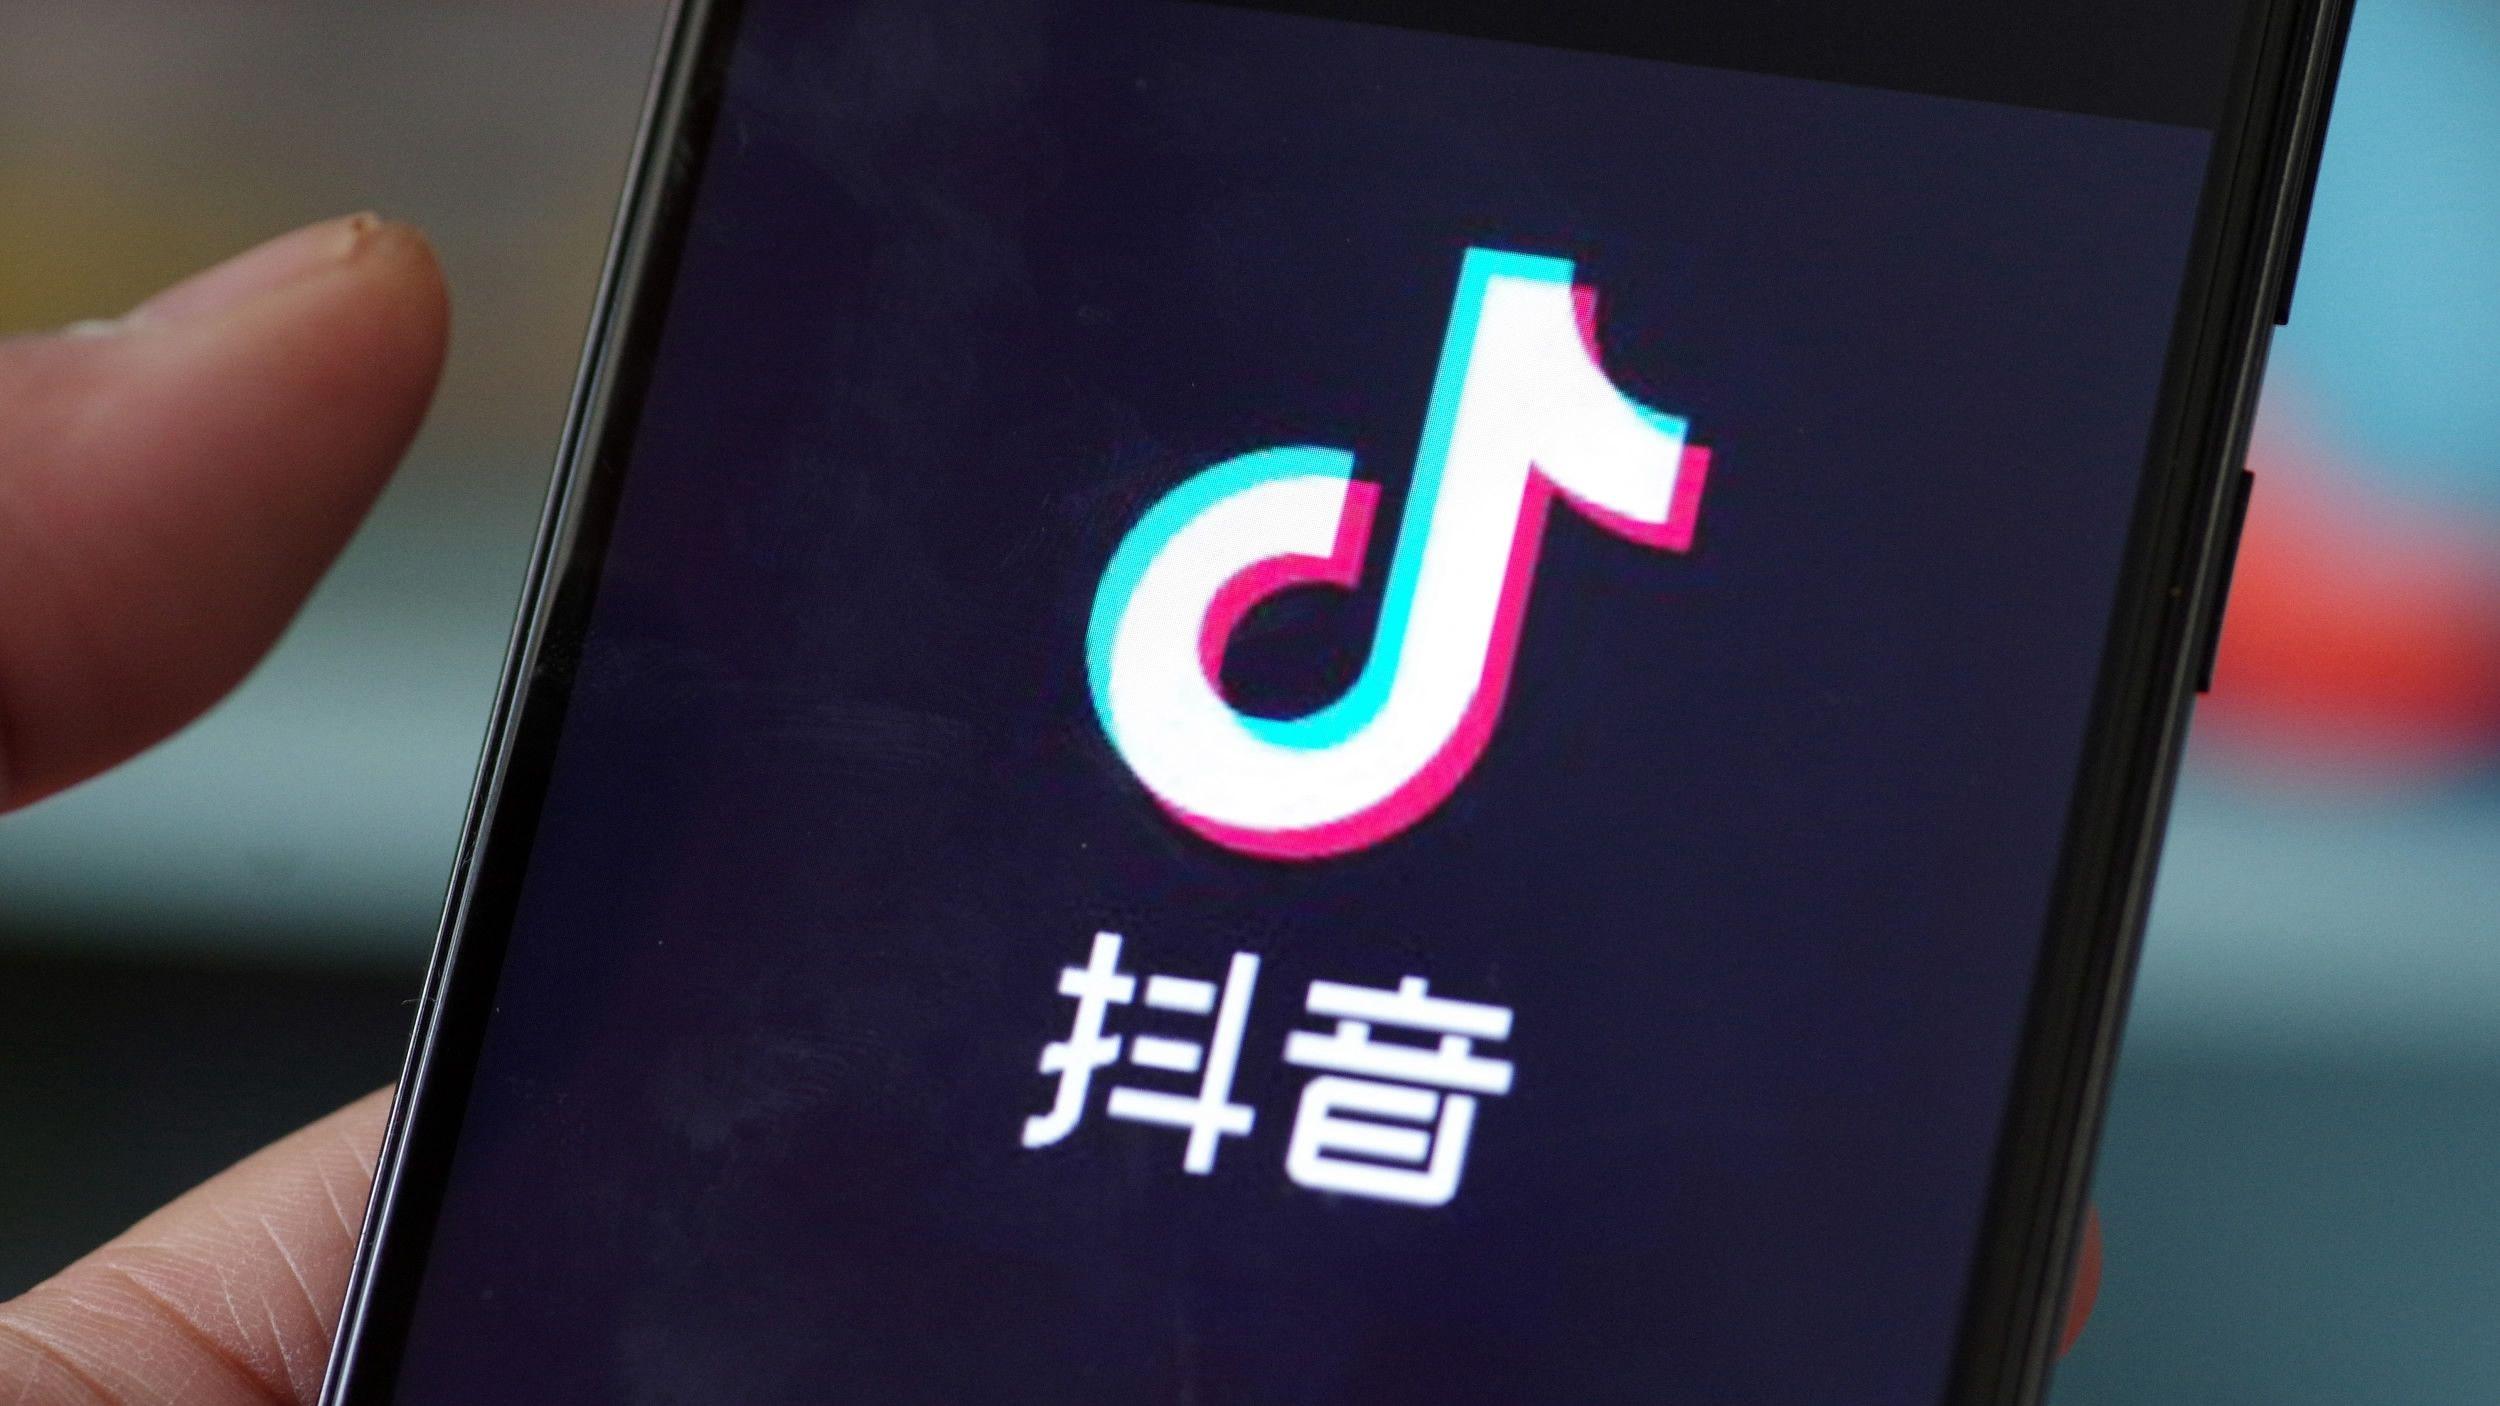 China's Tik Tok 'world's most downloaded app' in 2018 first quarter